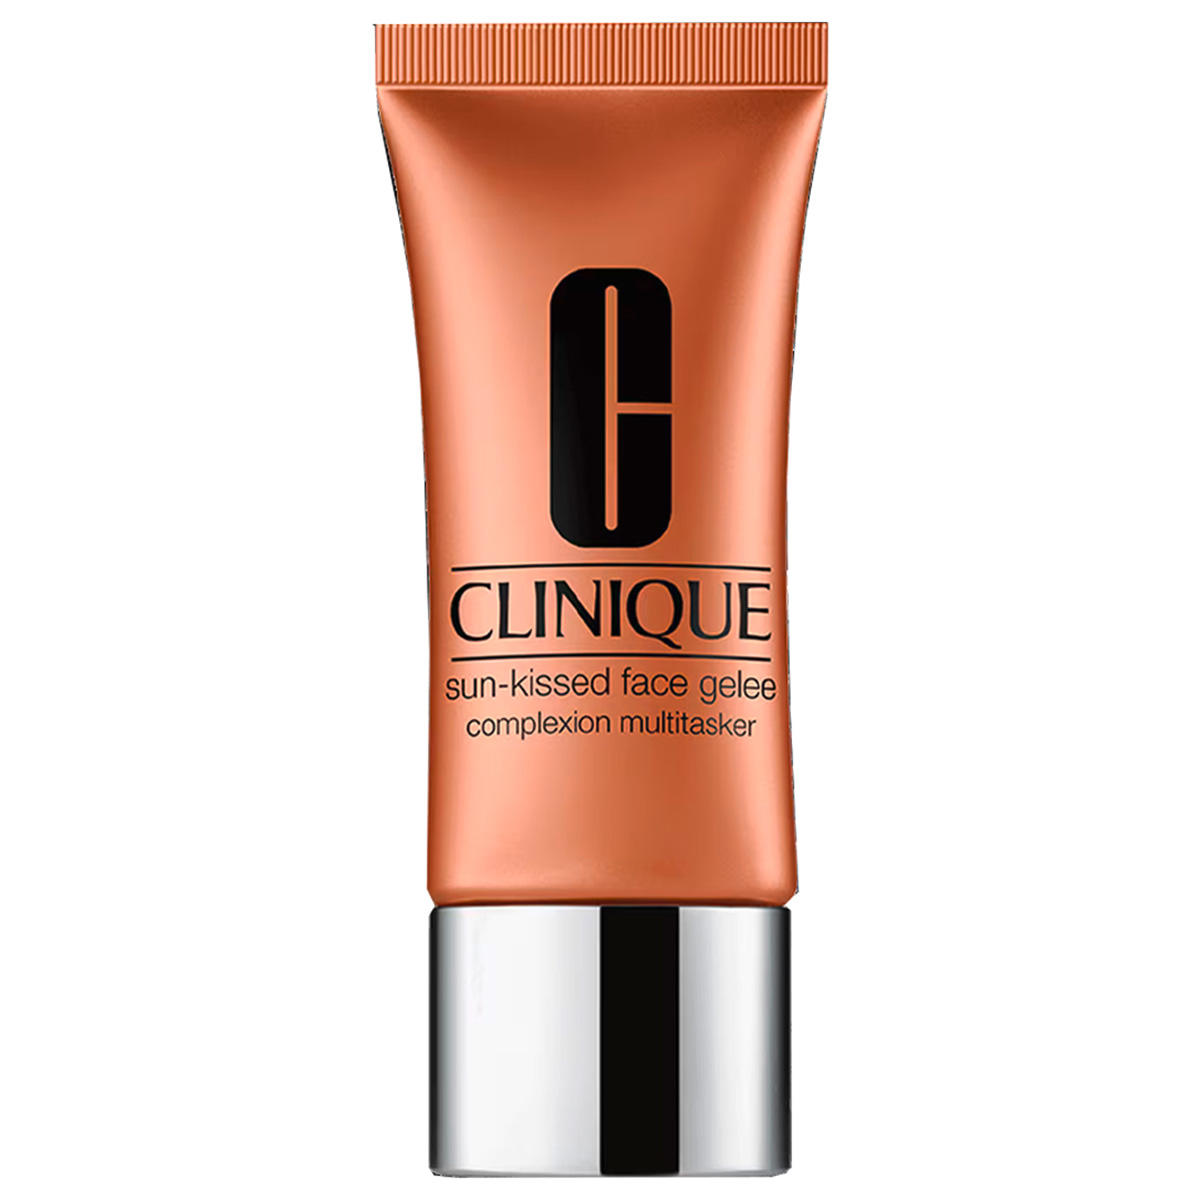 Clinique Sun-Kissed Face Jelly 30 ml - 1